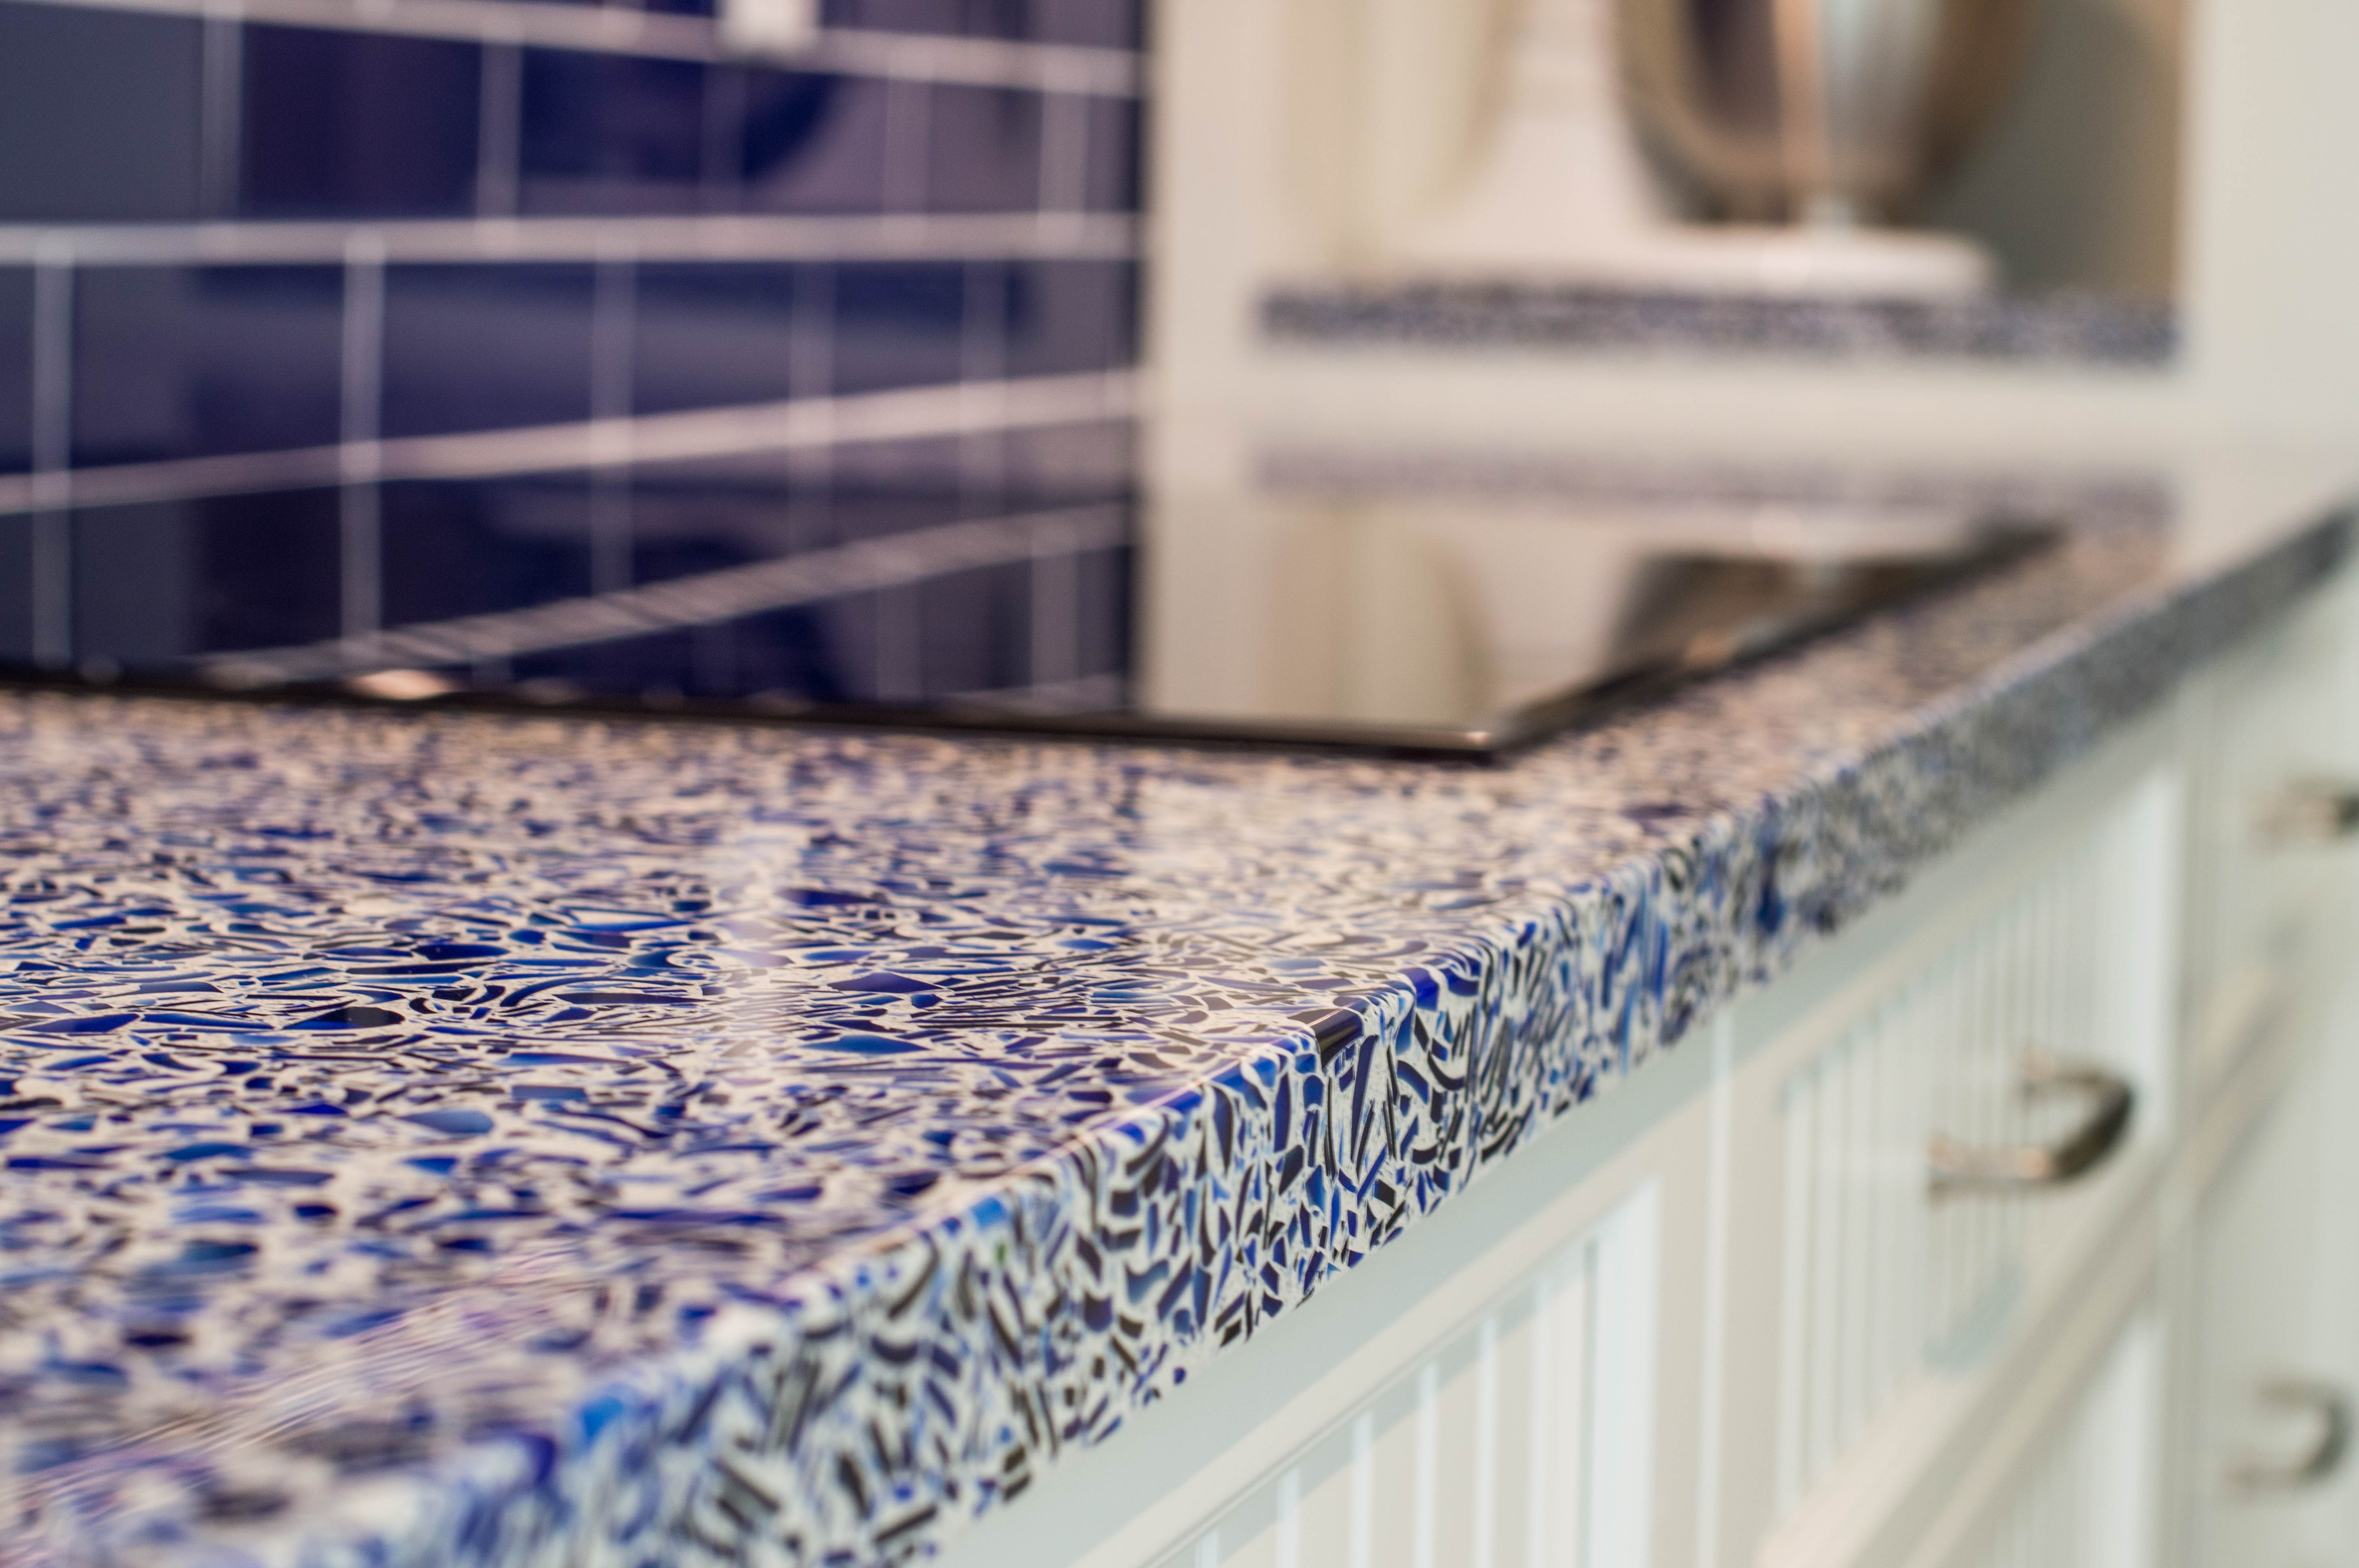 2-cobalt skye vetrazzo recycled glass countertops designed by waterview kitchens featuring crystal cabinets